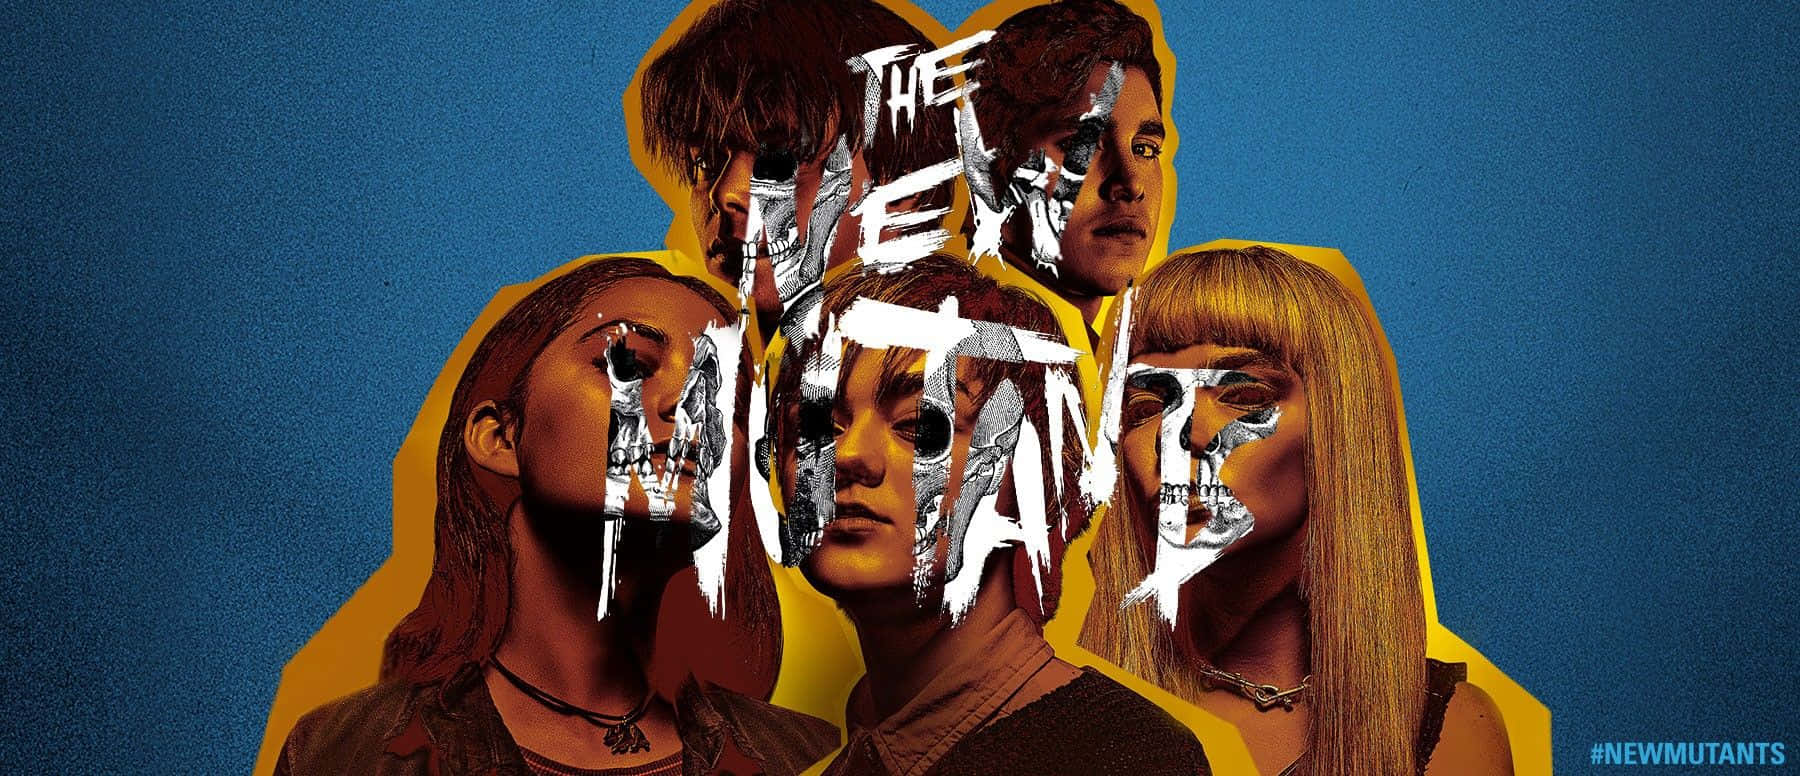 The New Mutants in an Enigmatic Group Pose Wallpaper